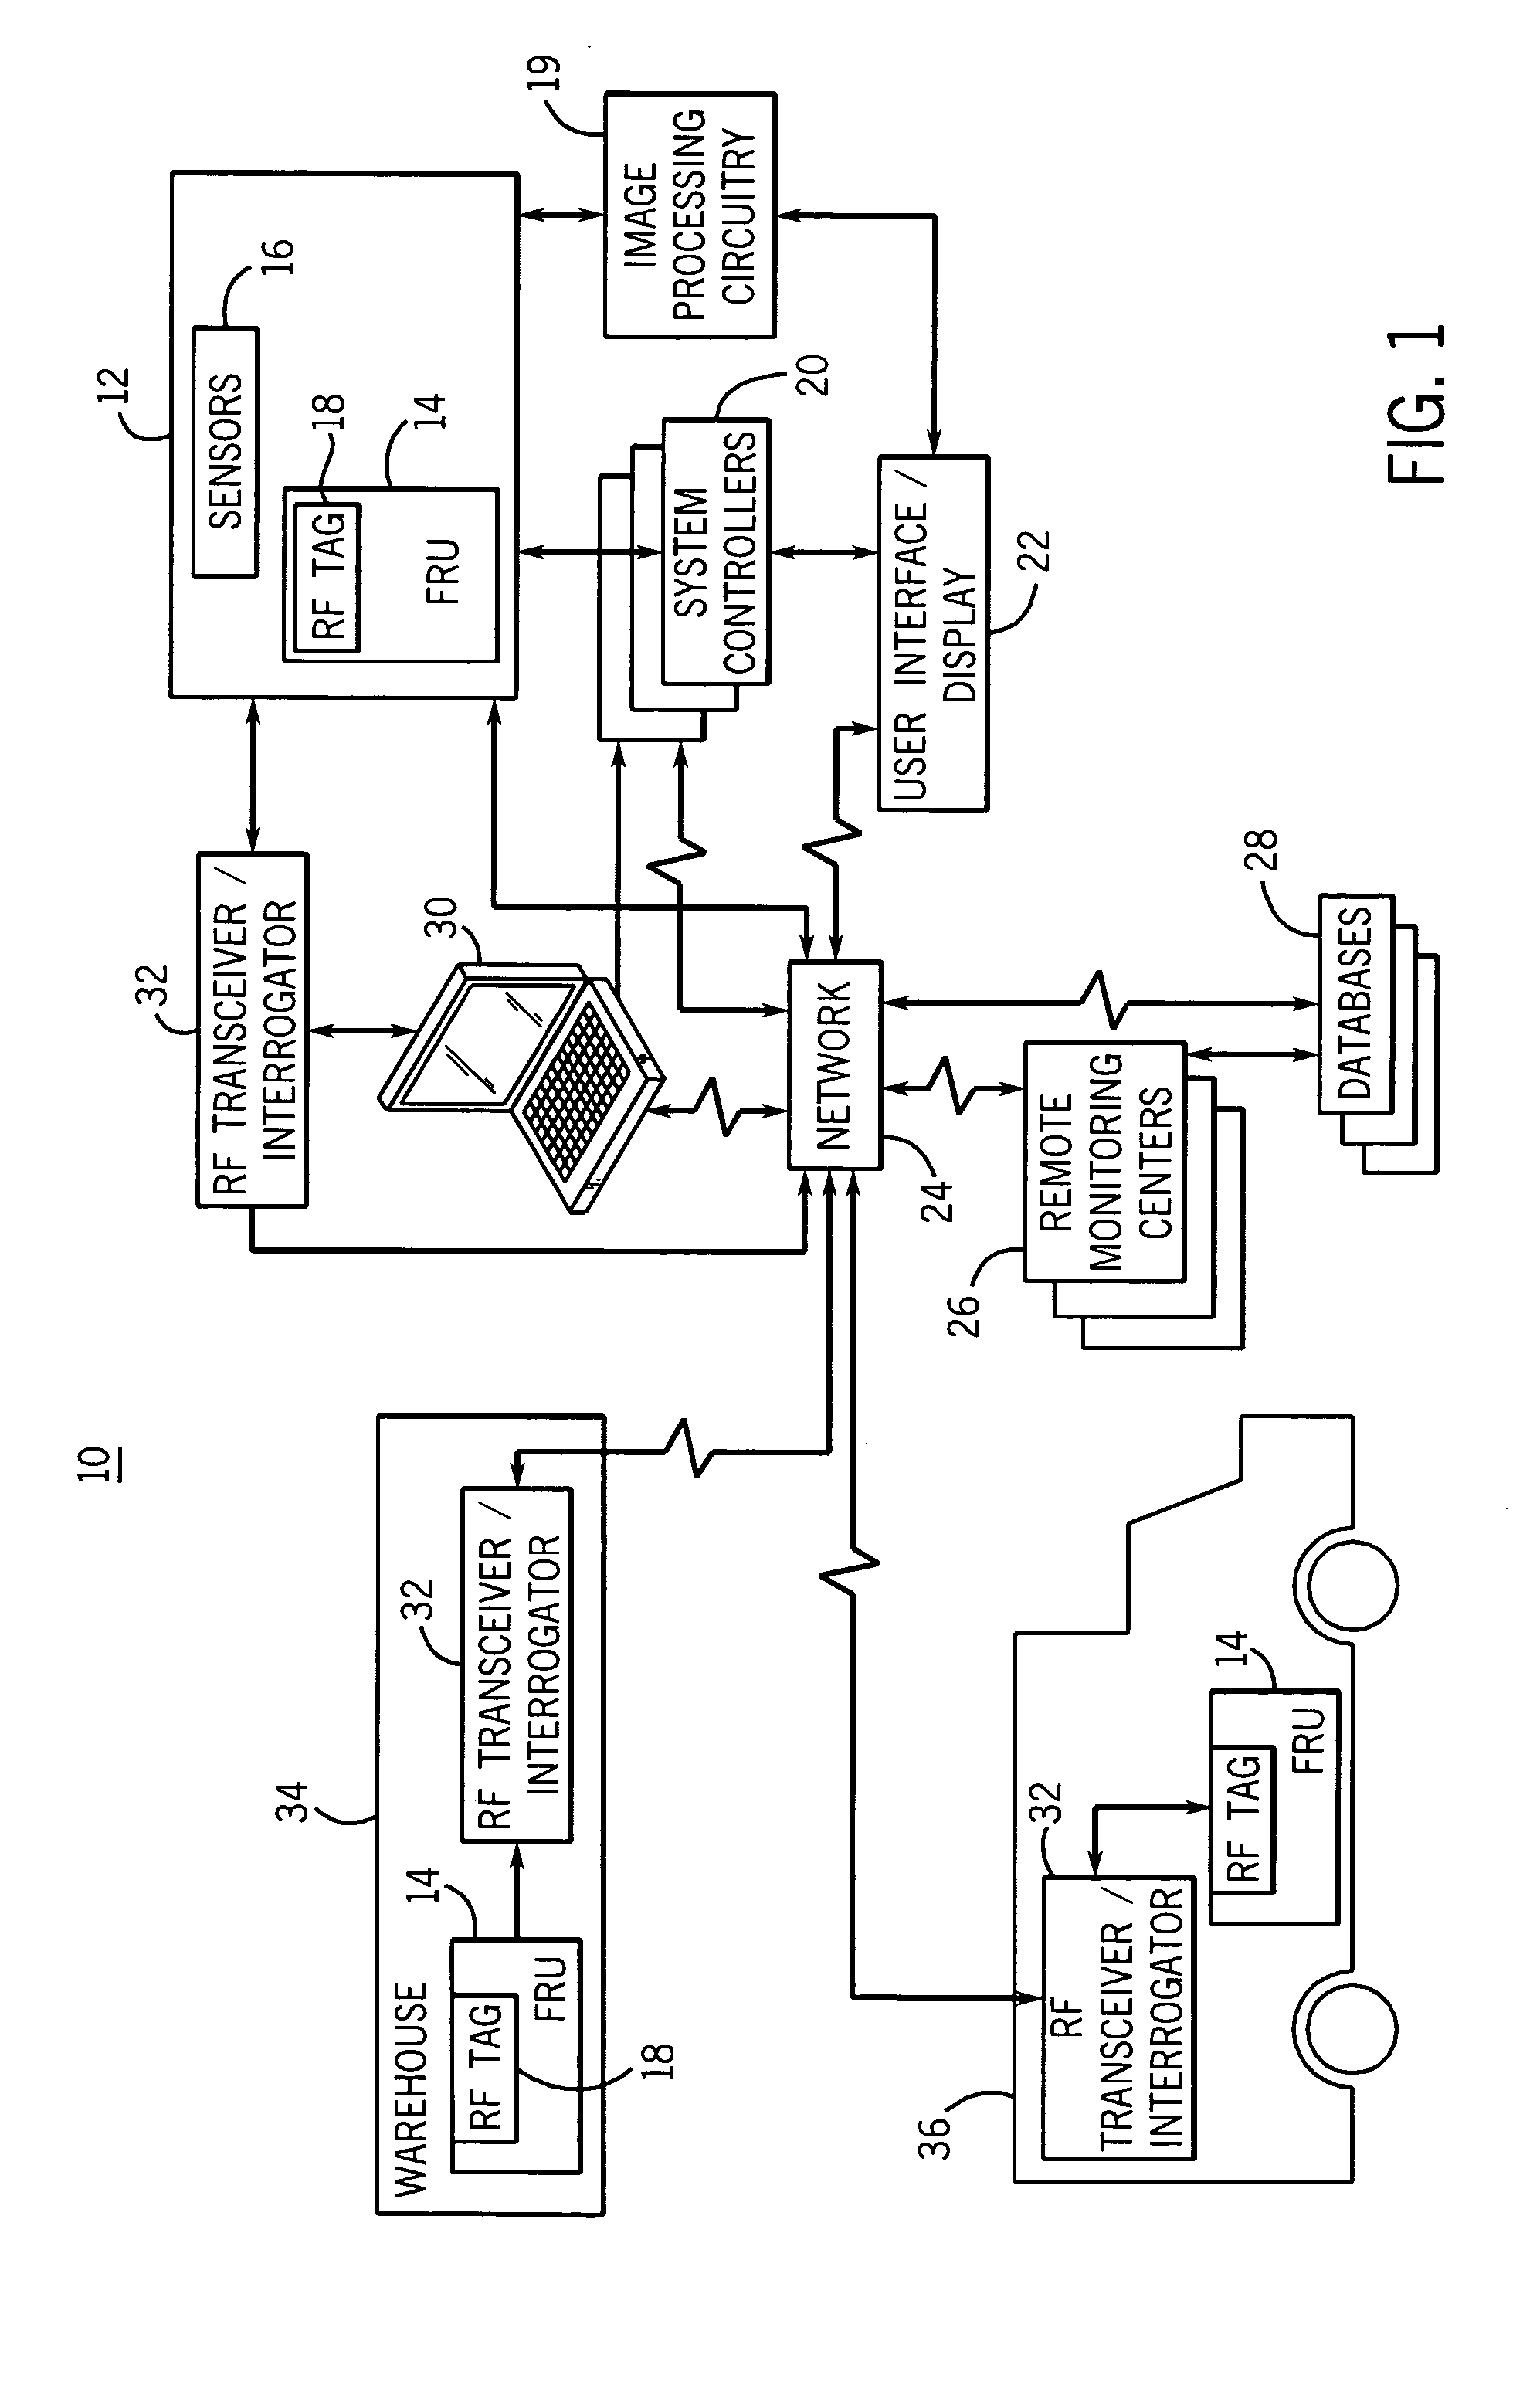 Method and system for determining hardware configuration of medical equipment using RF tags